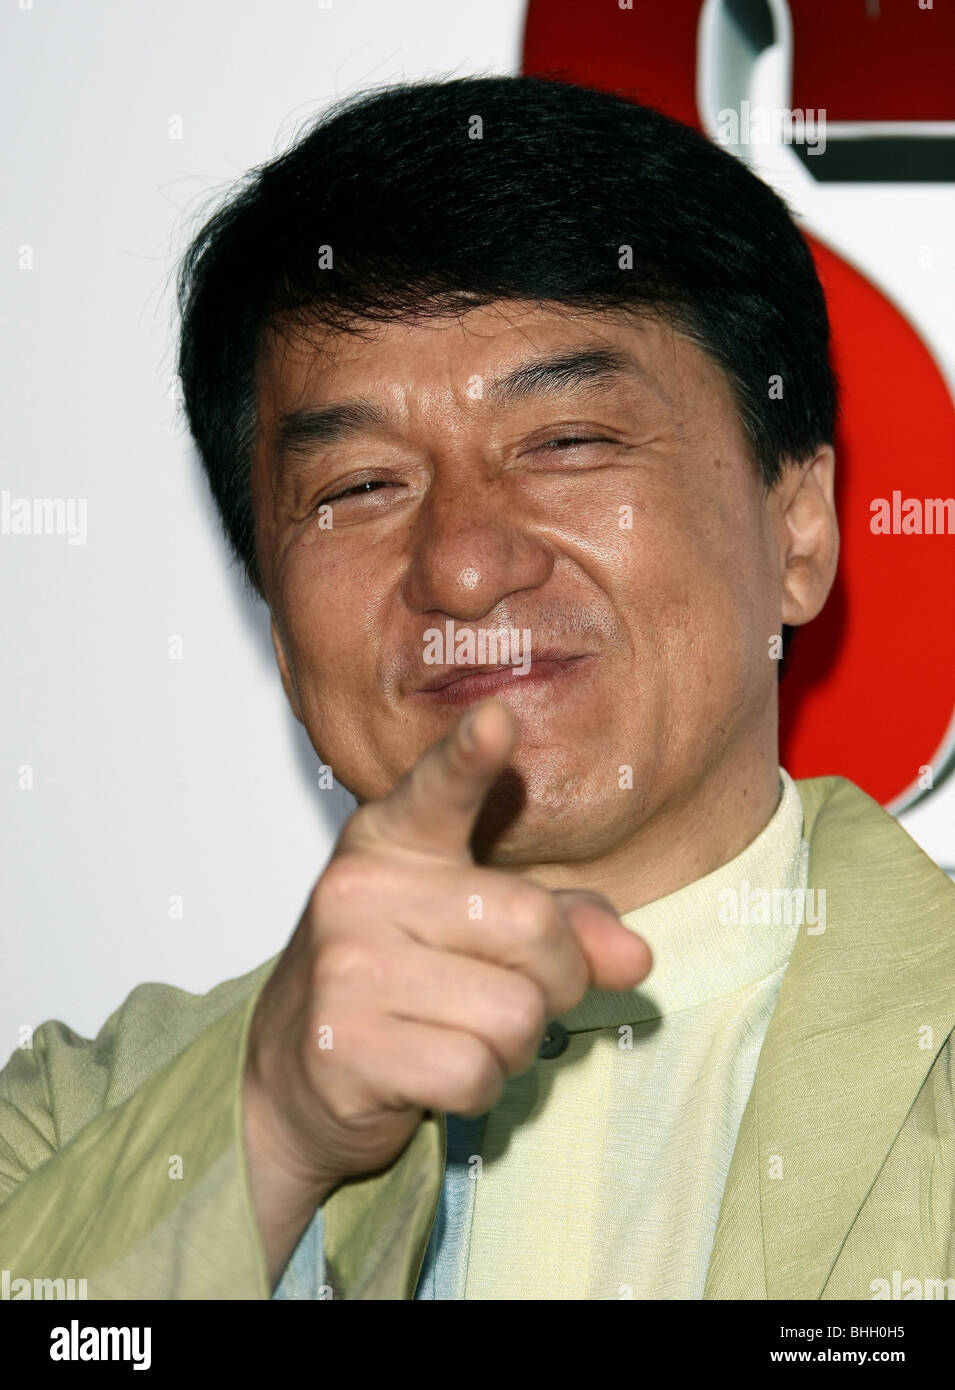 JACKIE CHAN SPY ACCANTO PREMIERE MONDIALE BEVERLY HILLS LOS ANGELES CA USA 09 Gennaio 2010 Foto Stock